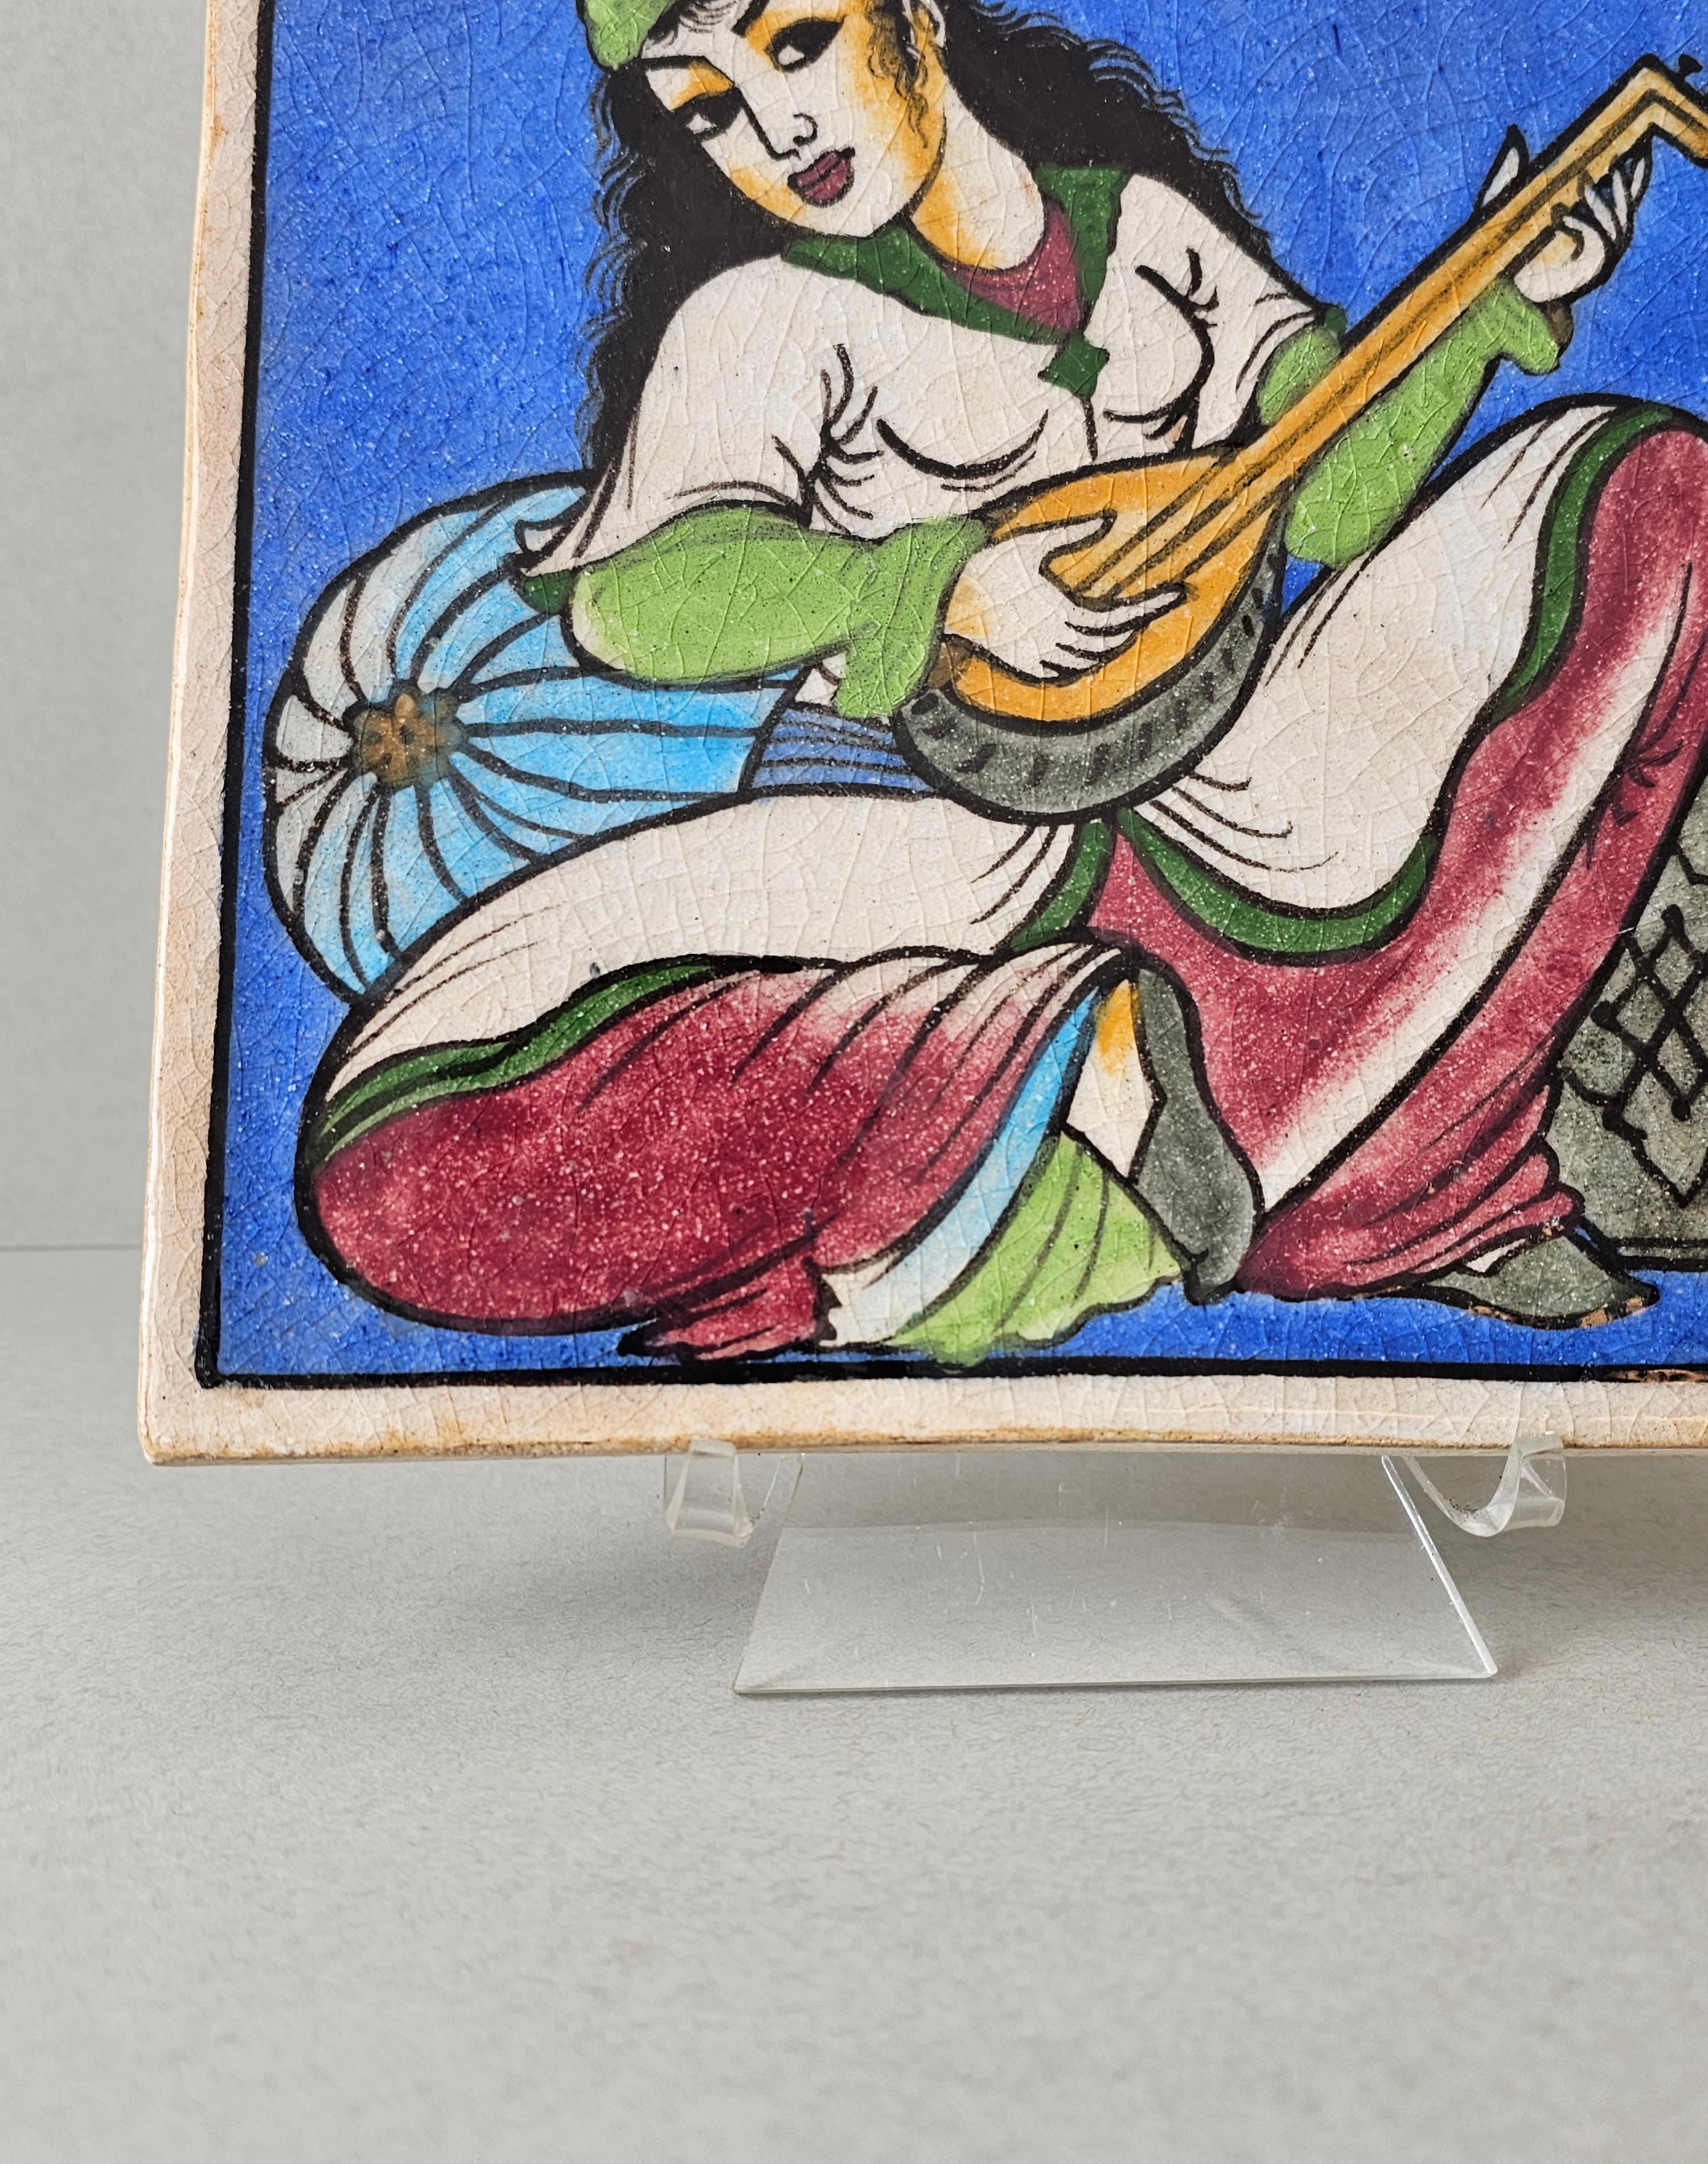 Indo-Persian Hand Painted Ceramic Wall Tile  For Sale 4